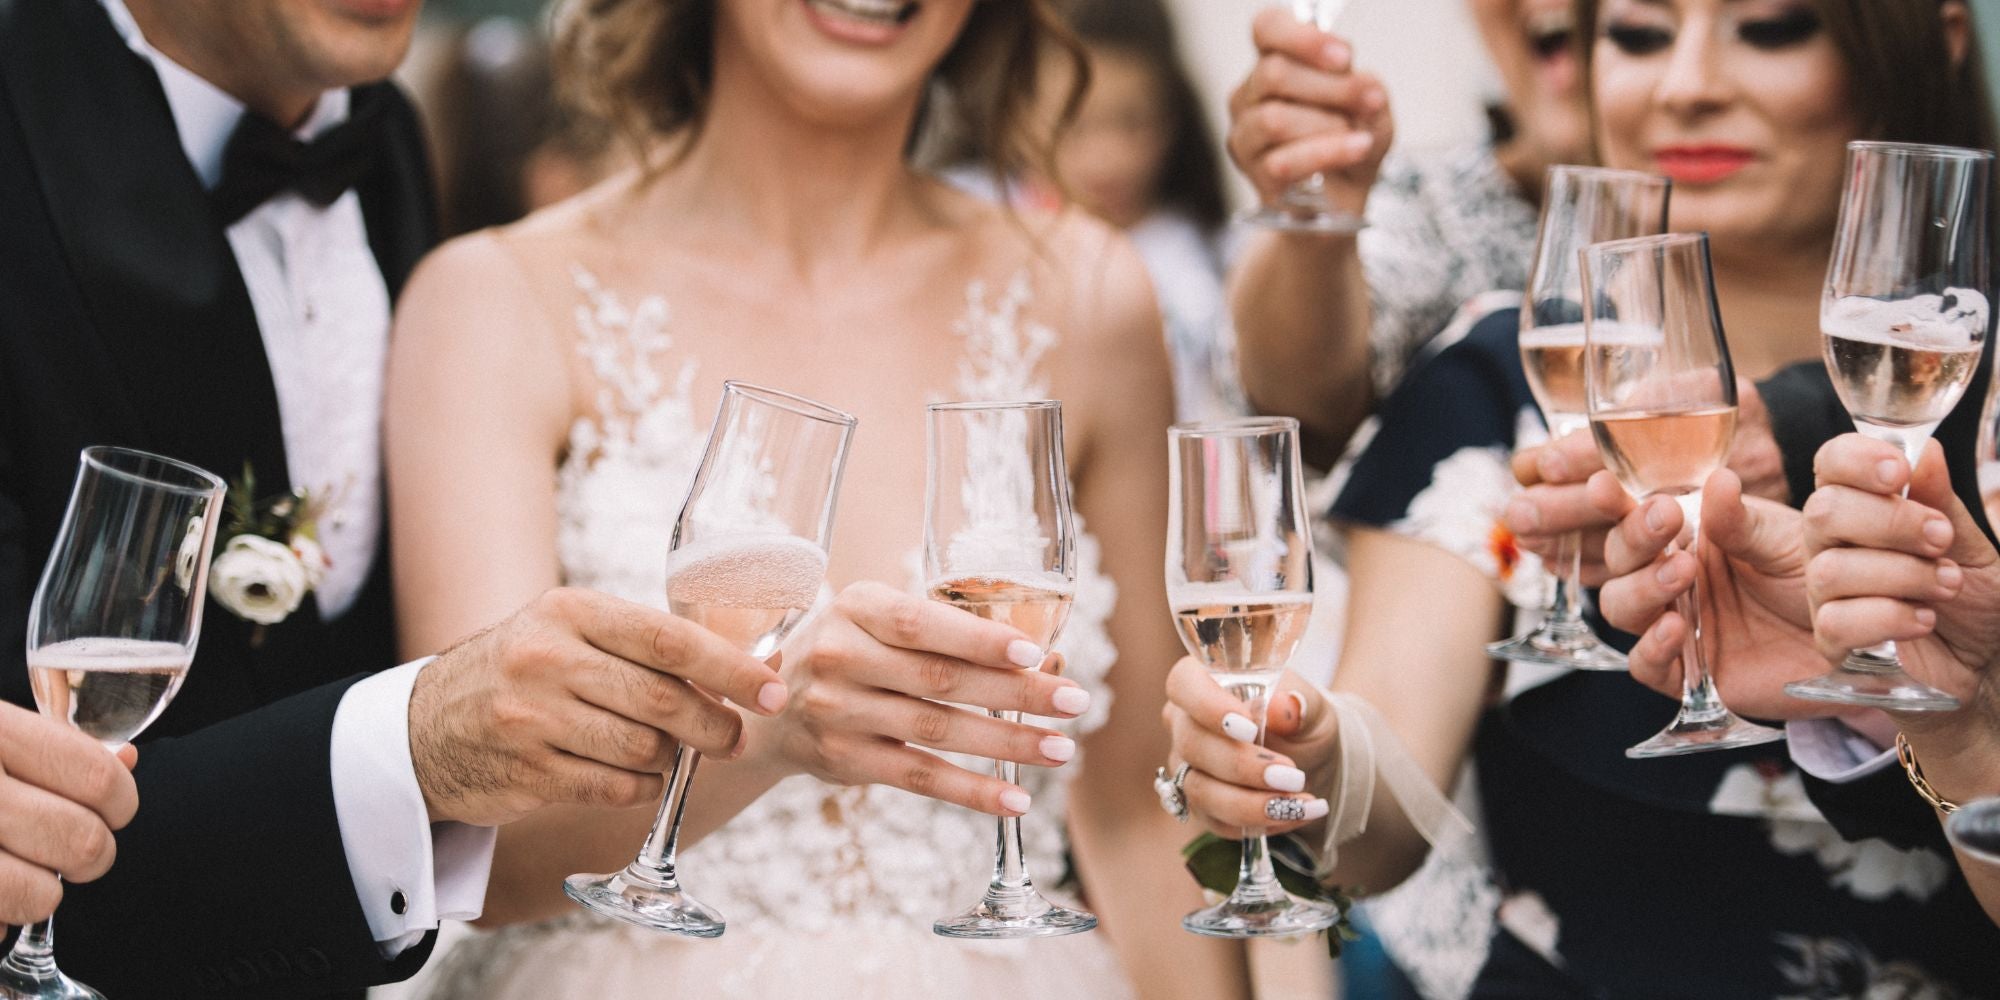 Wedding Hangover Kit: 15 Items to Include That Your Guests Will Thank You  For 